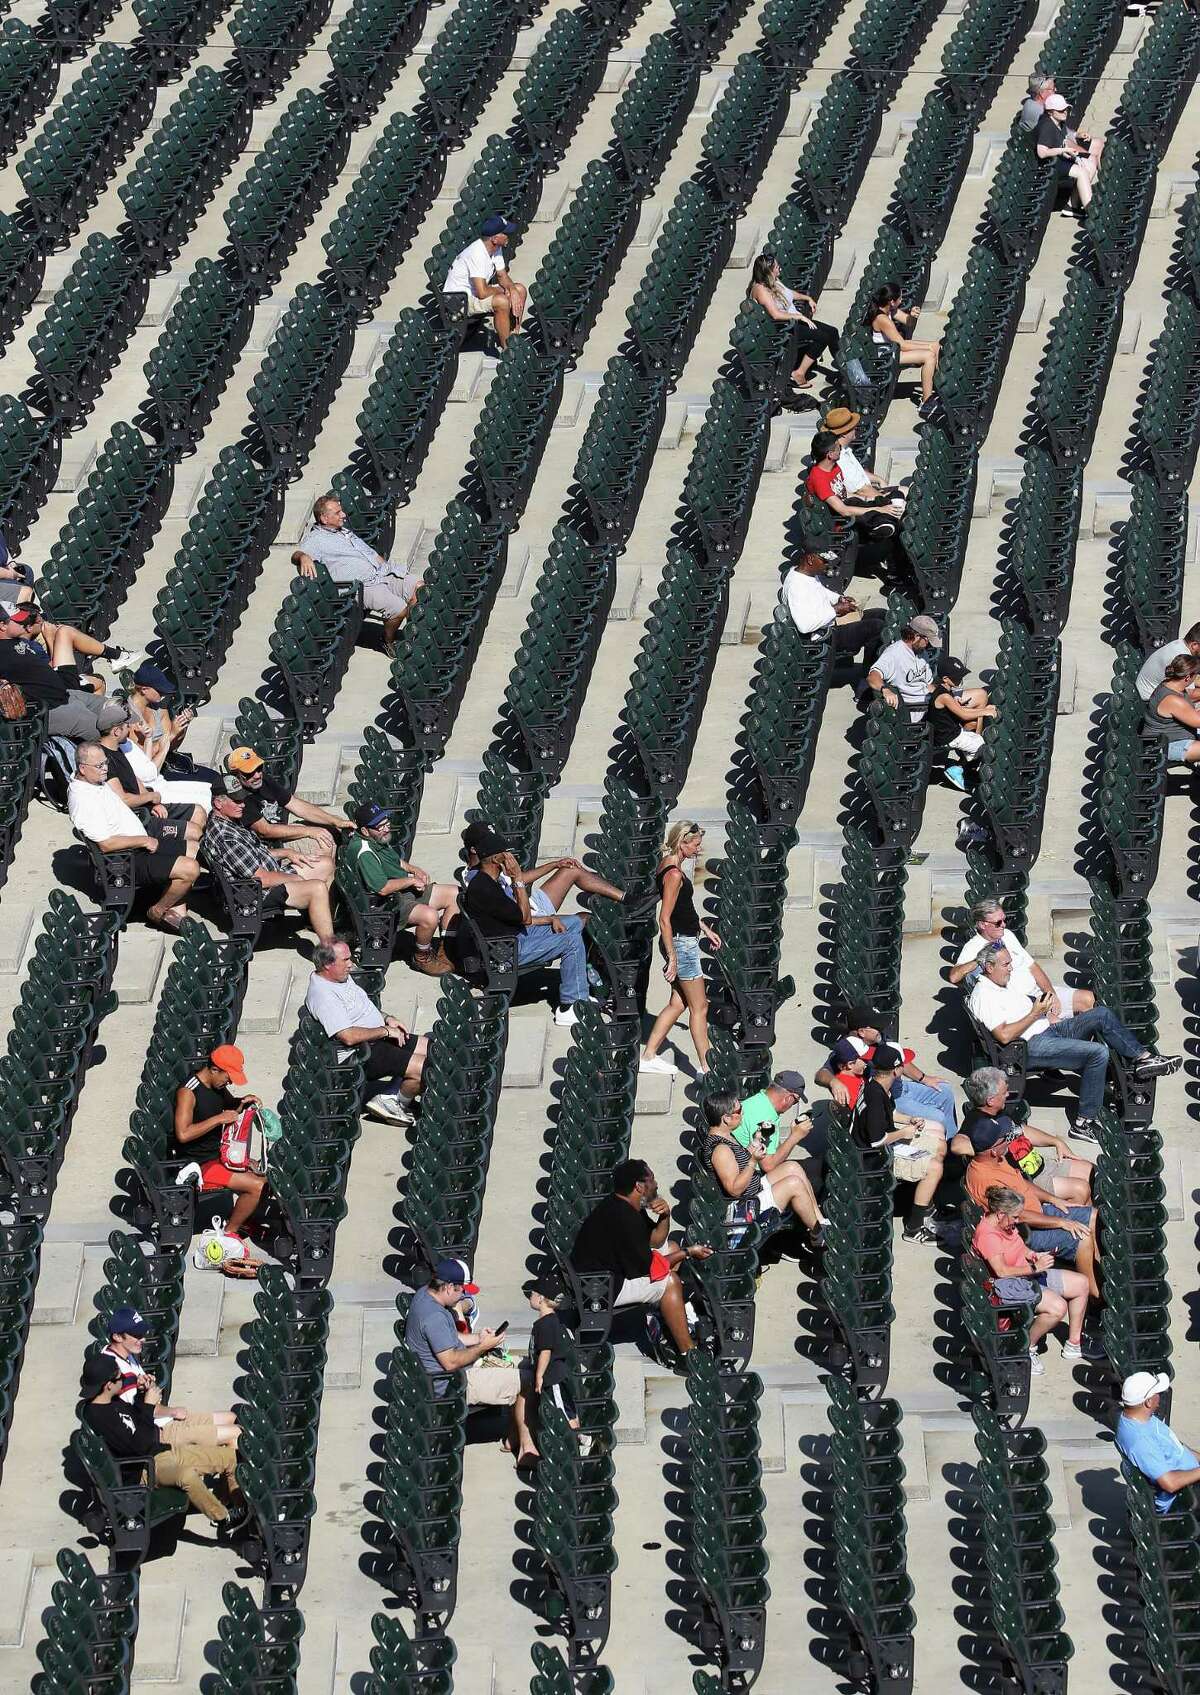 CHICAGO, ILLINOIS - AUGUST 13: A small crowd attends the first game of a double header at Guaranteed Rate Field between the Chicago White Sox and the Houston Astros on August 13, 2019 in Chicago, Illinois. (Photo by Jonathan Daniel/Getty Images)